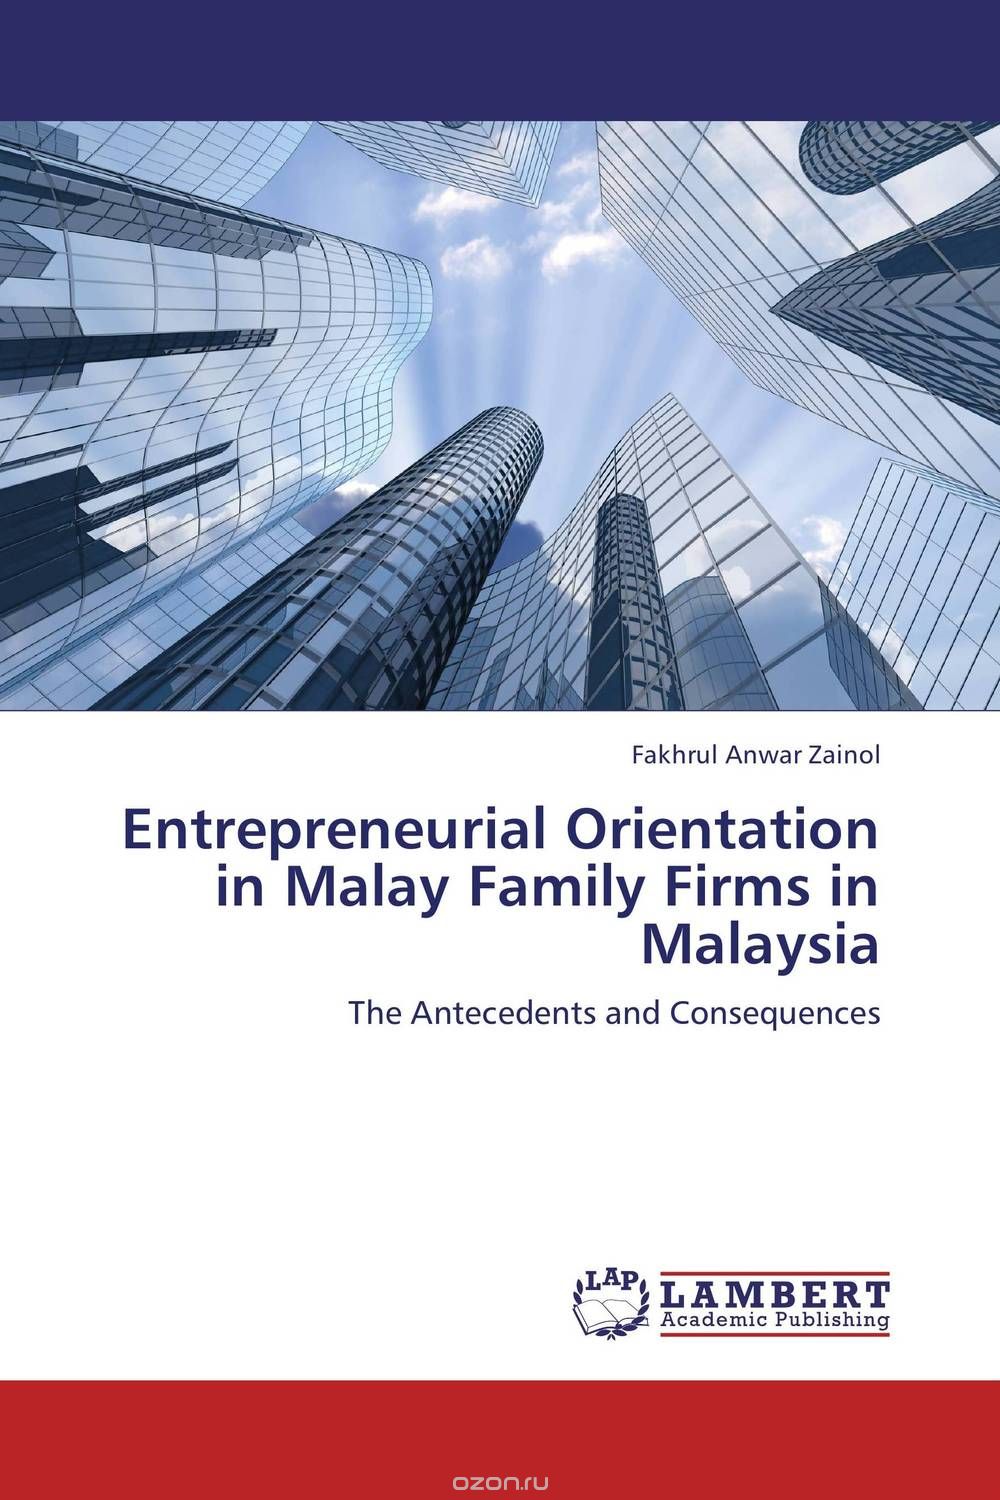 Entrepreneurial Orientation in Malay Family Firms in Malaysia